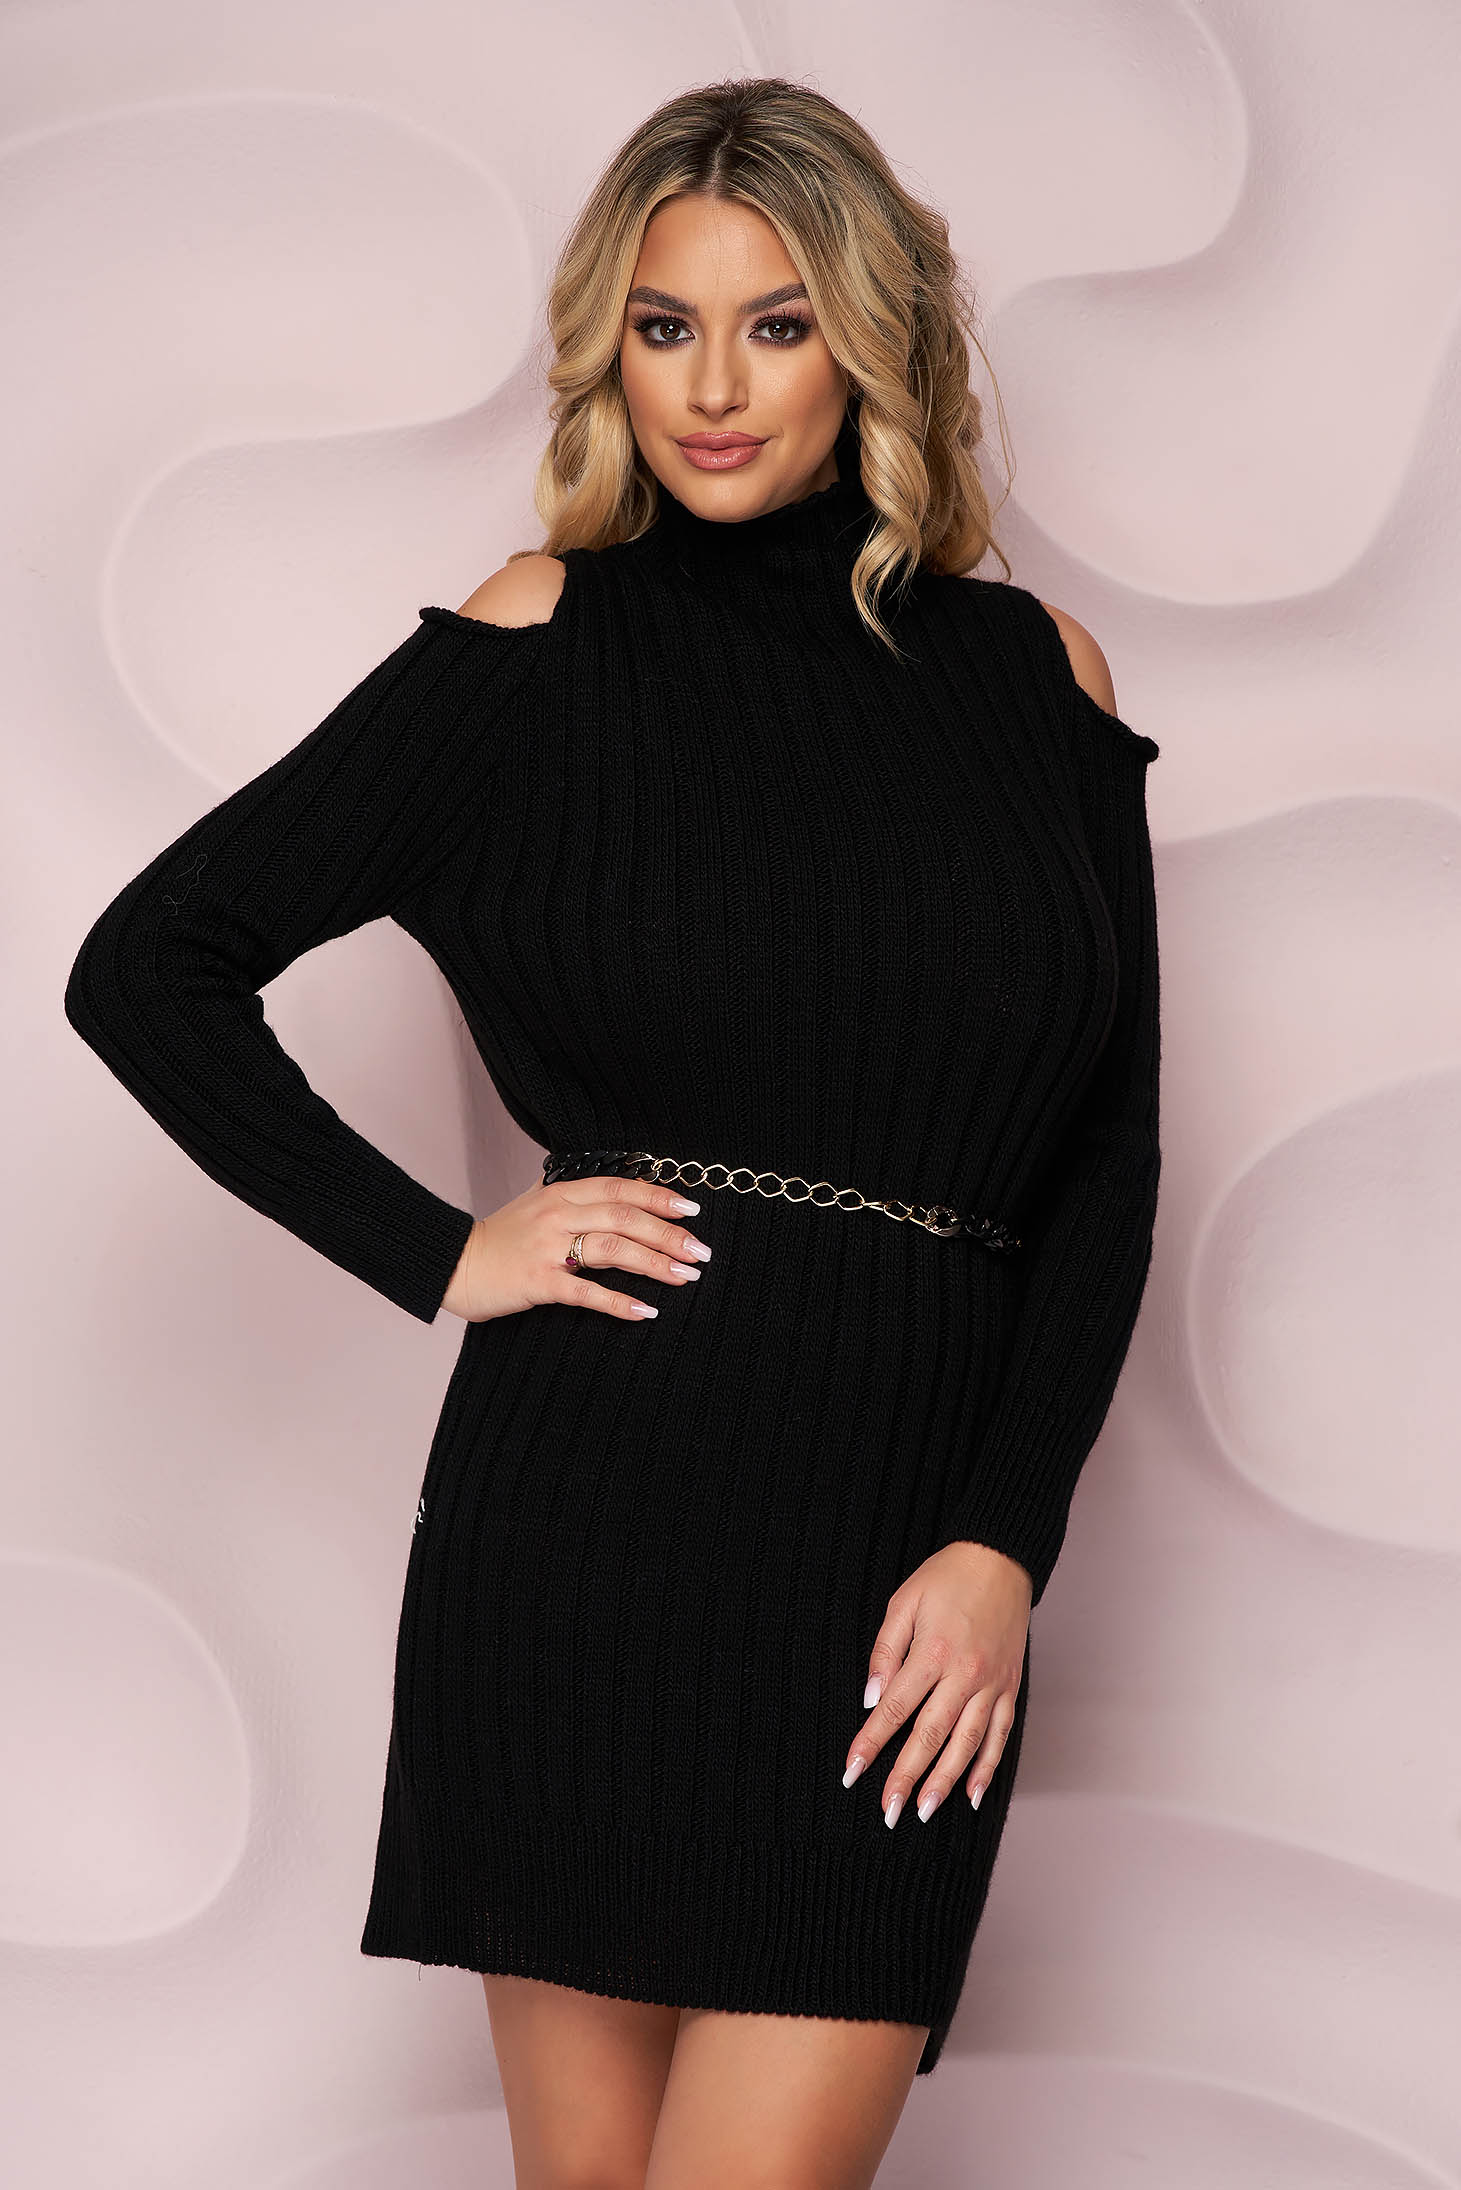 Black dress knitted fabric accessorized with belt both shoulders cut out